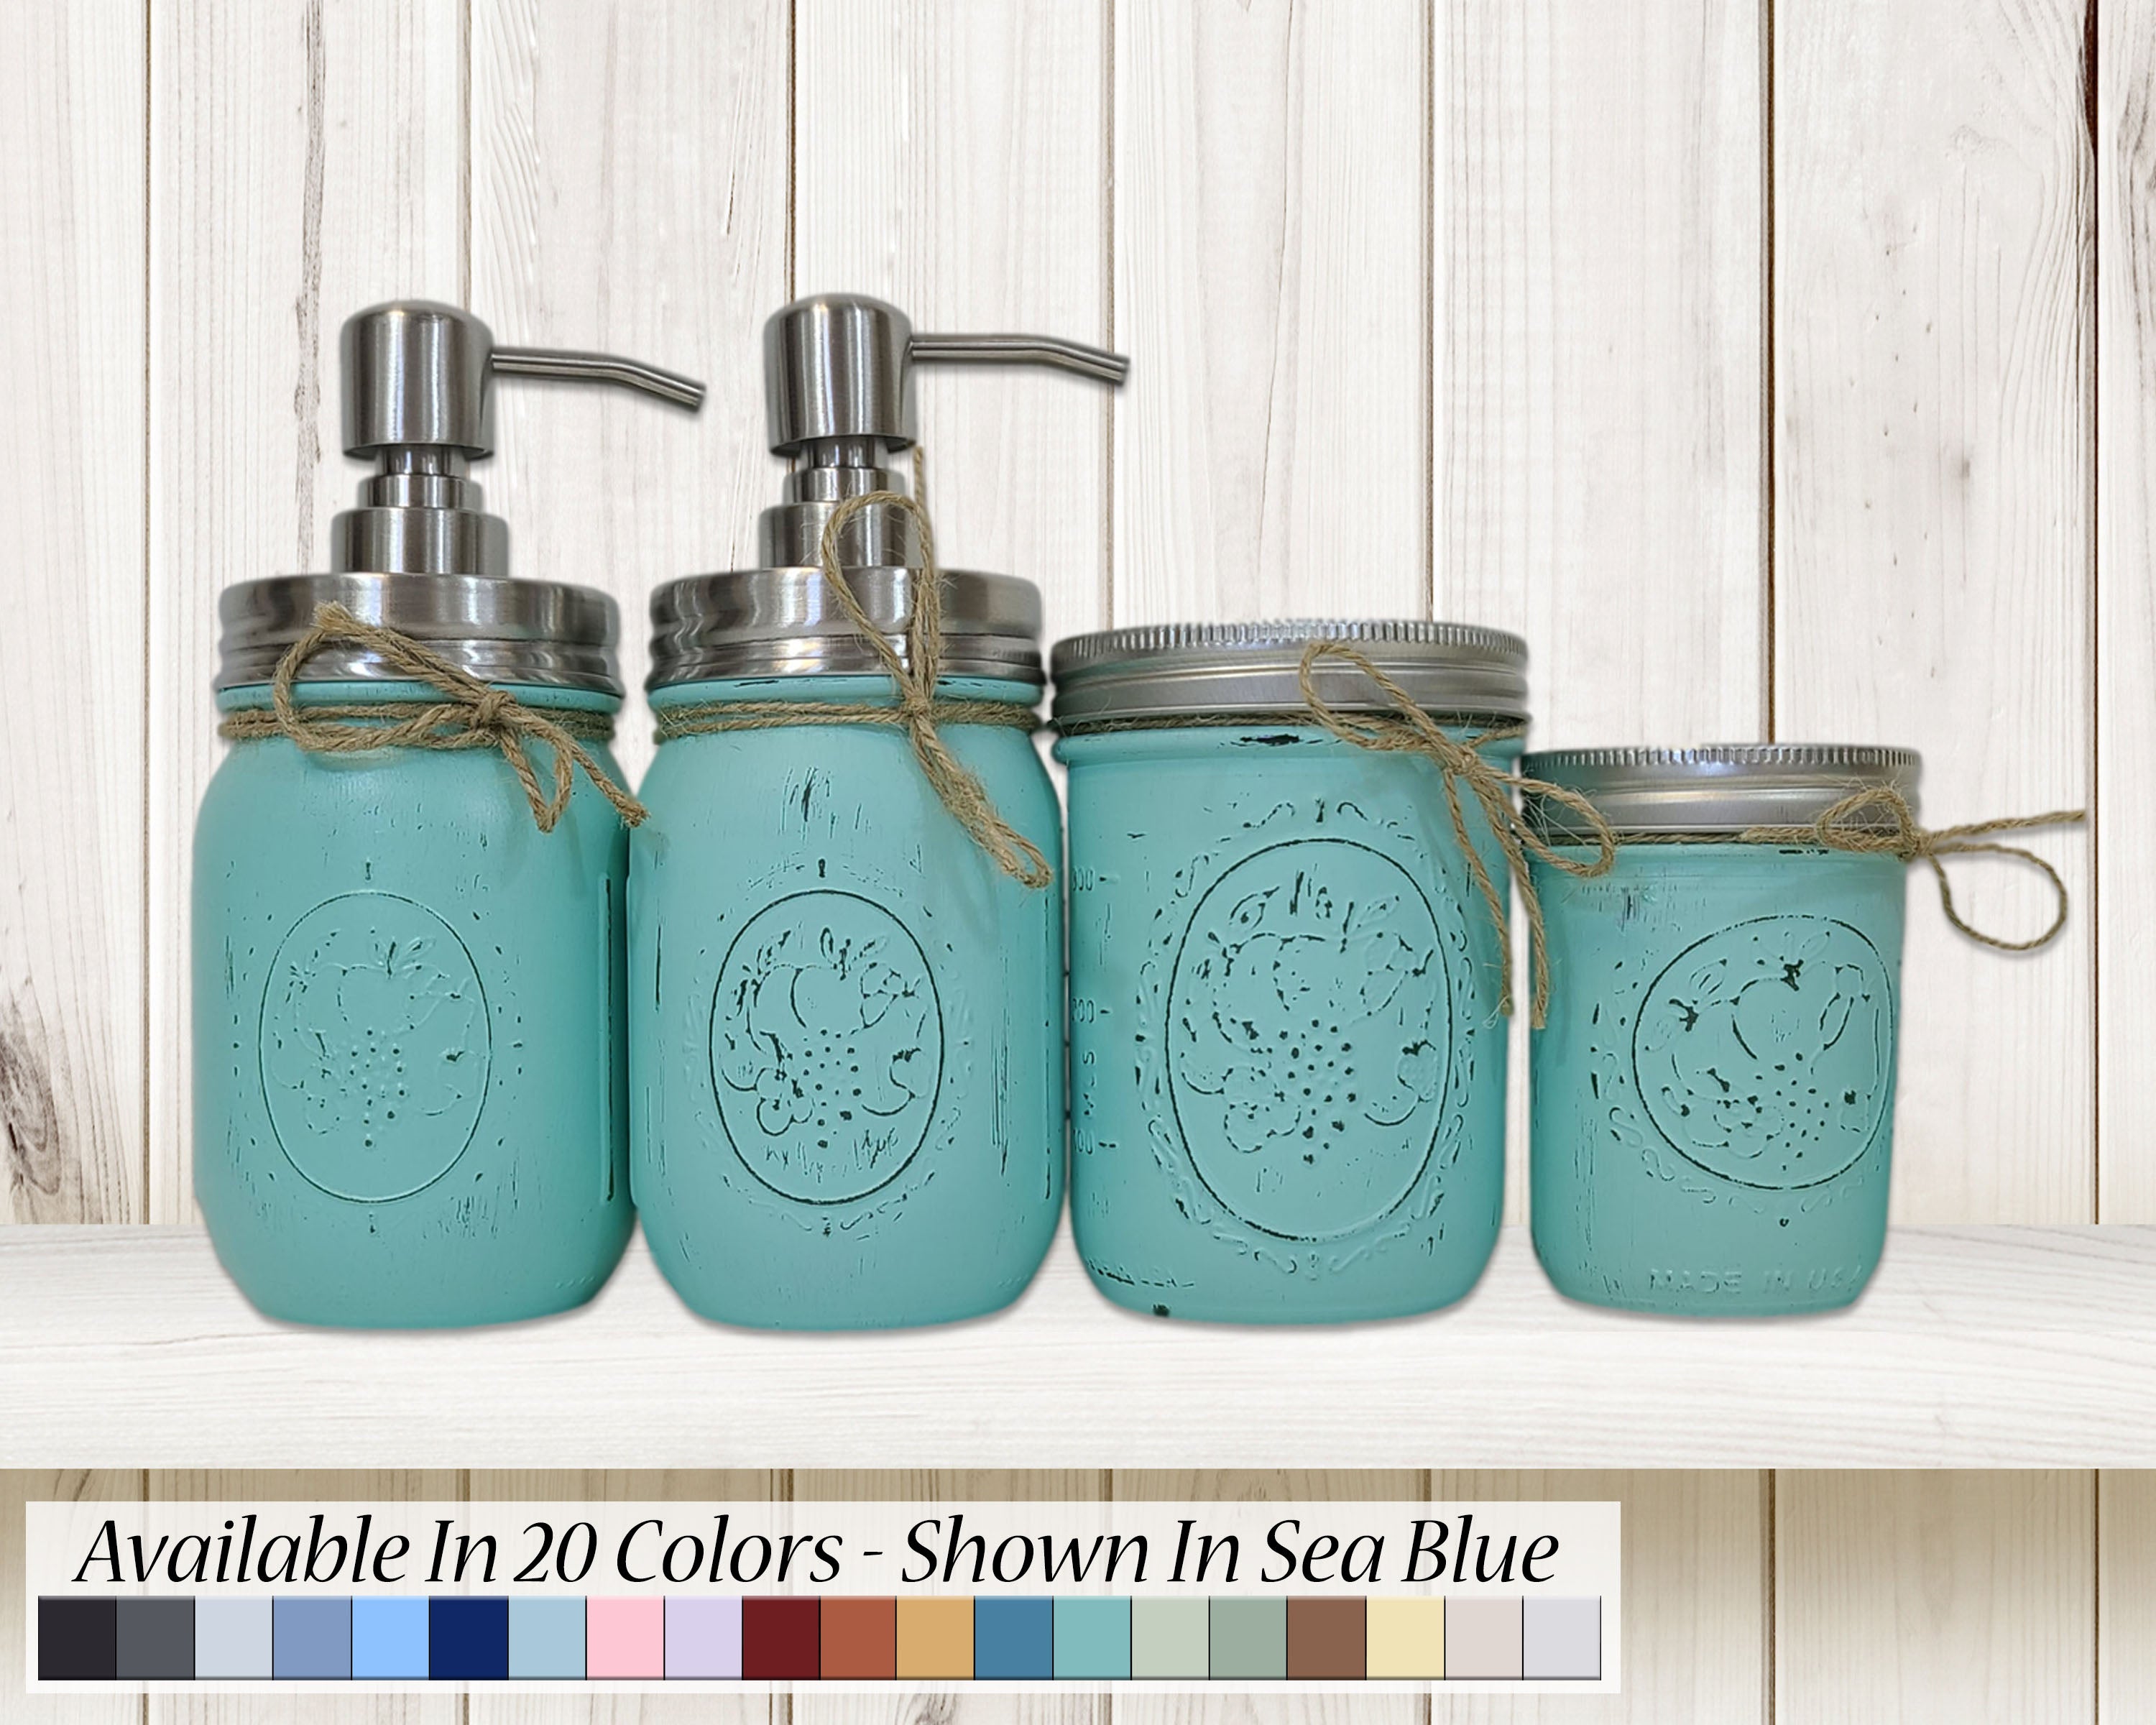 Custom Painted Mason Jar Bathroom Set, 20 Paint Colors, Shown in Sea Blue with Sliver Lids